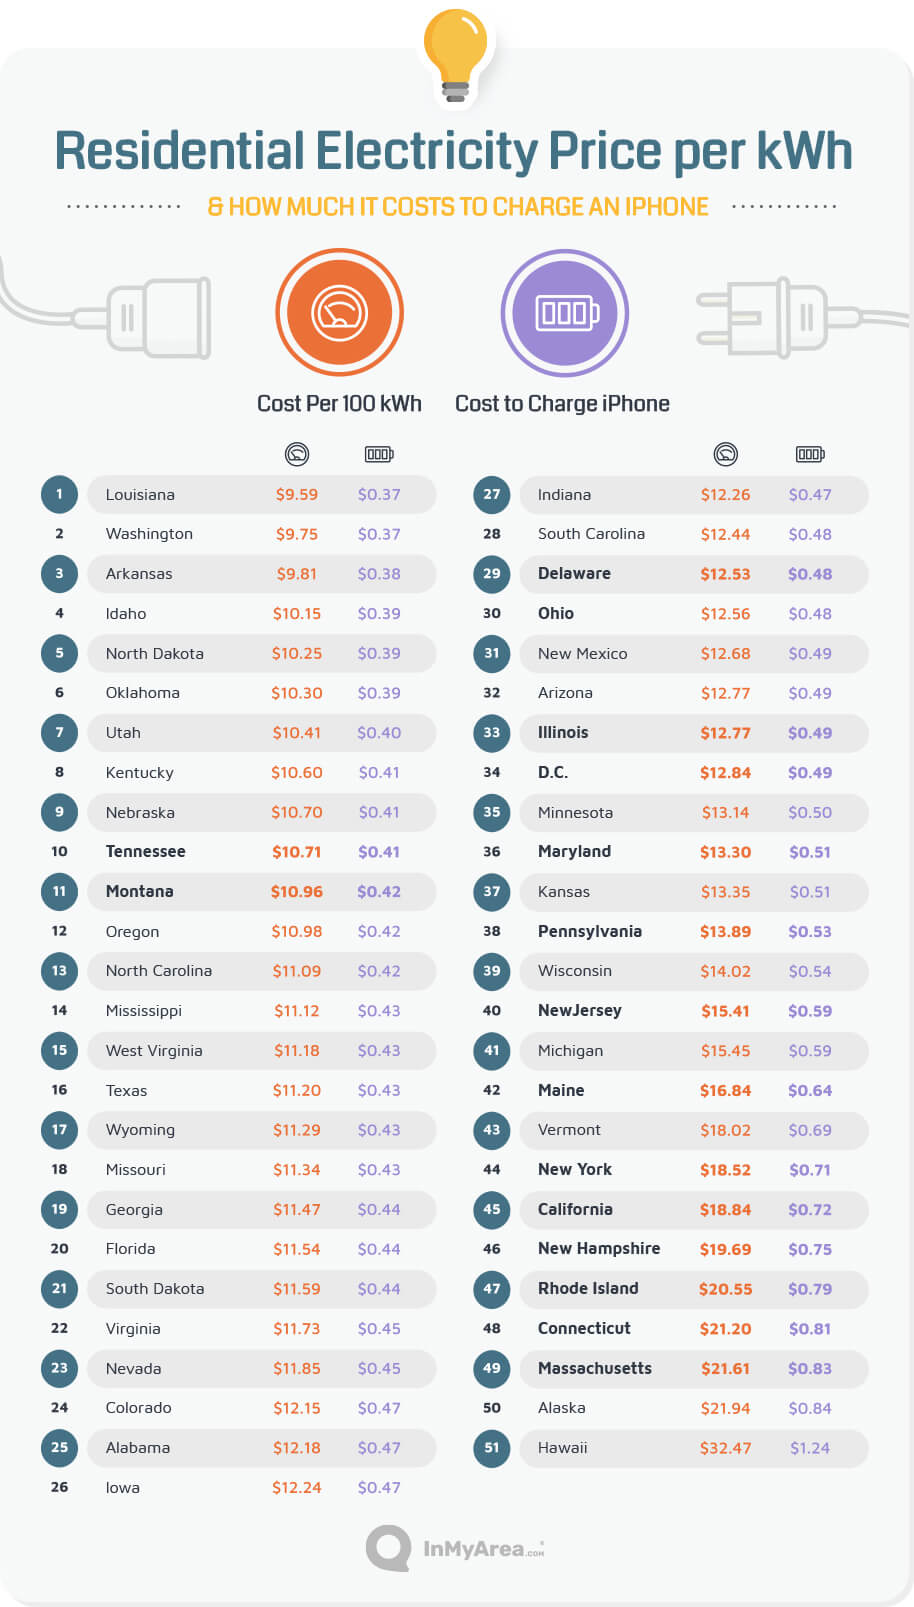 Residential electricity price per kWh & how much it costs to charge an iPhone